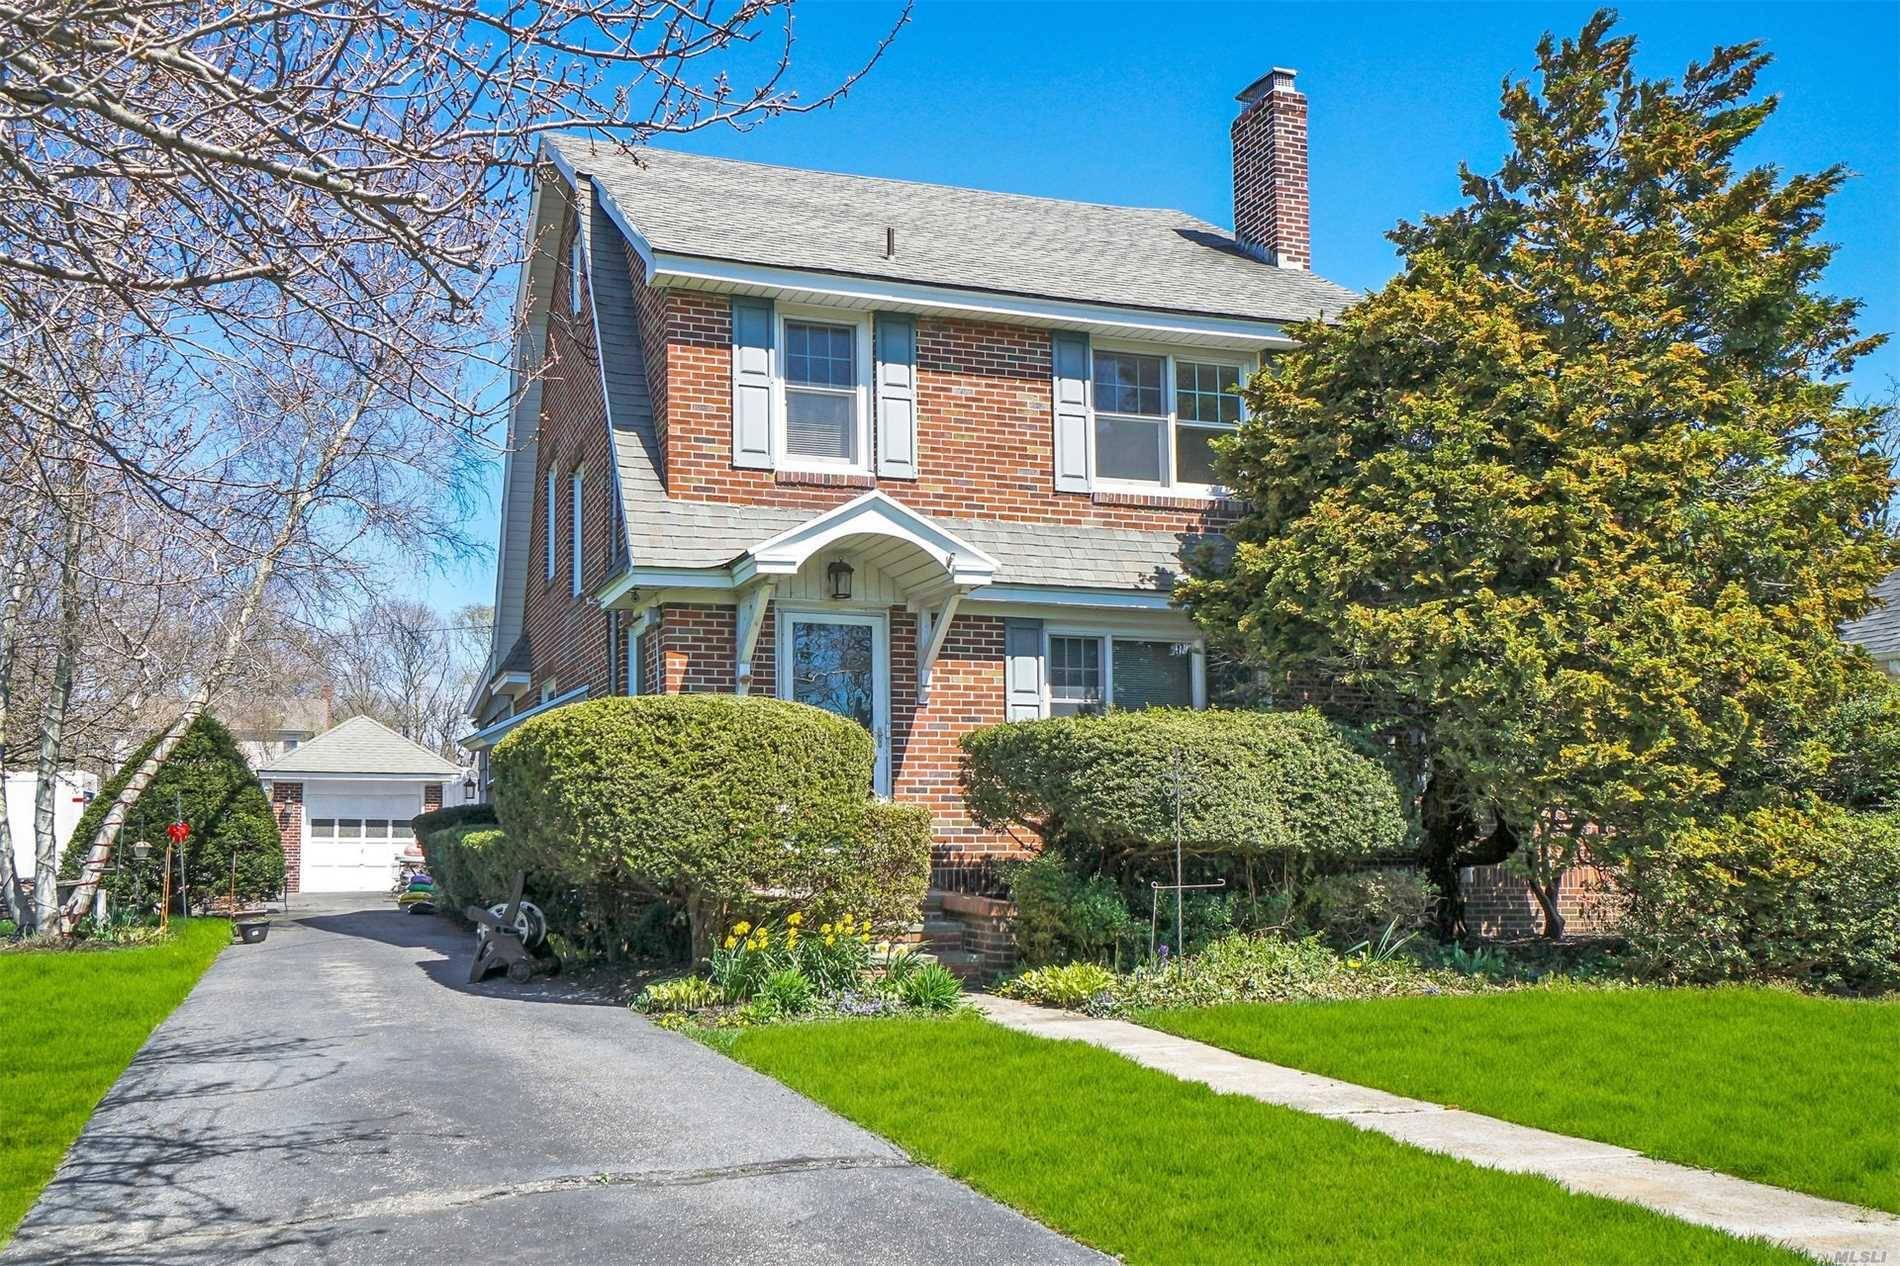 Inviting Dutch Style Colonial Captivates You With It's Charm Spacious Flow, Granite Kit W Maple Cabinetry, S S Appls, Fam Rm W Wd Stove, Vaulted Ceilings, New Windows, Fdr, Office, ...